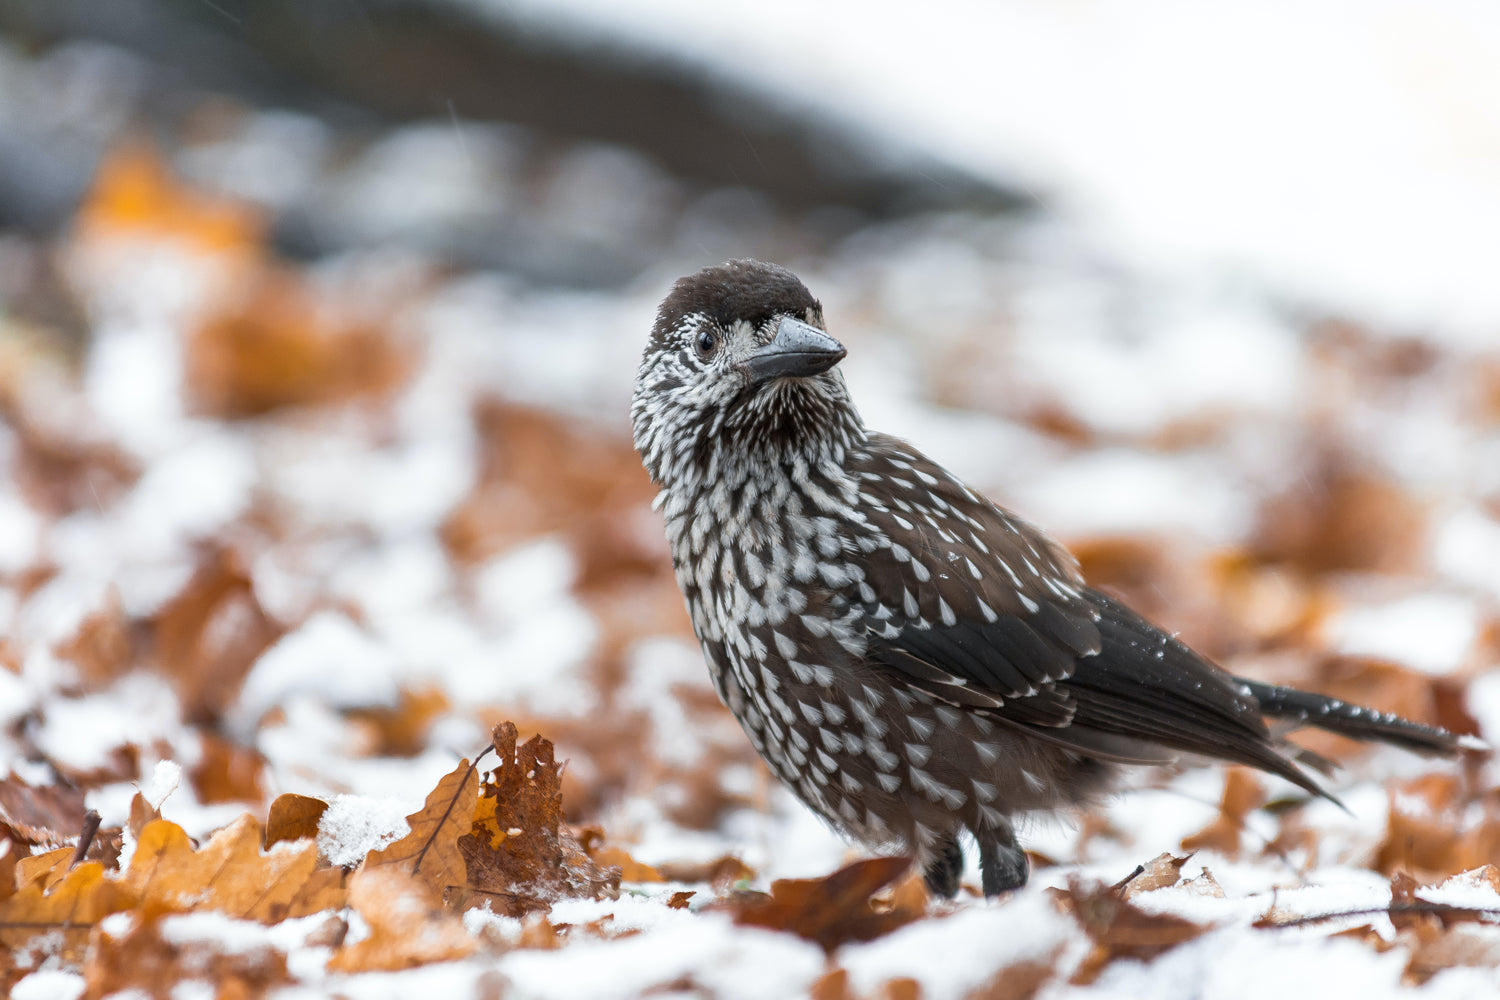 A Spotted Nutcracker On Snow Covered Leaves